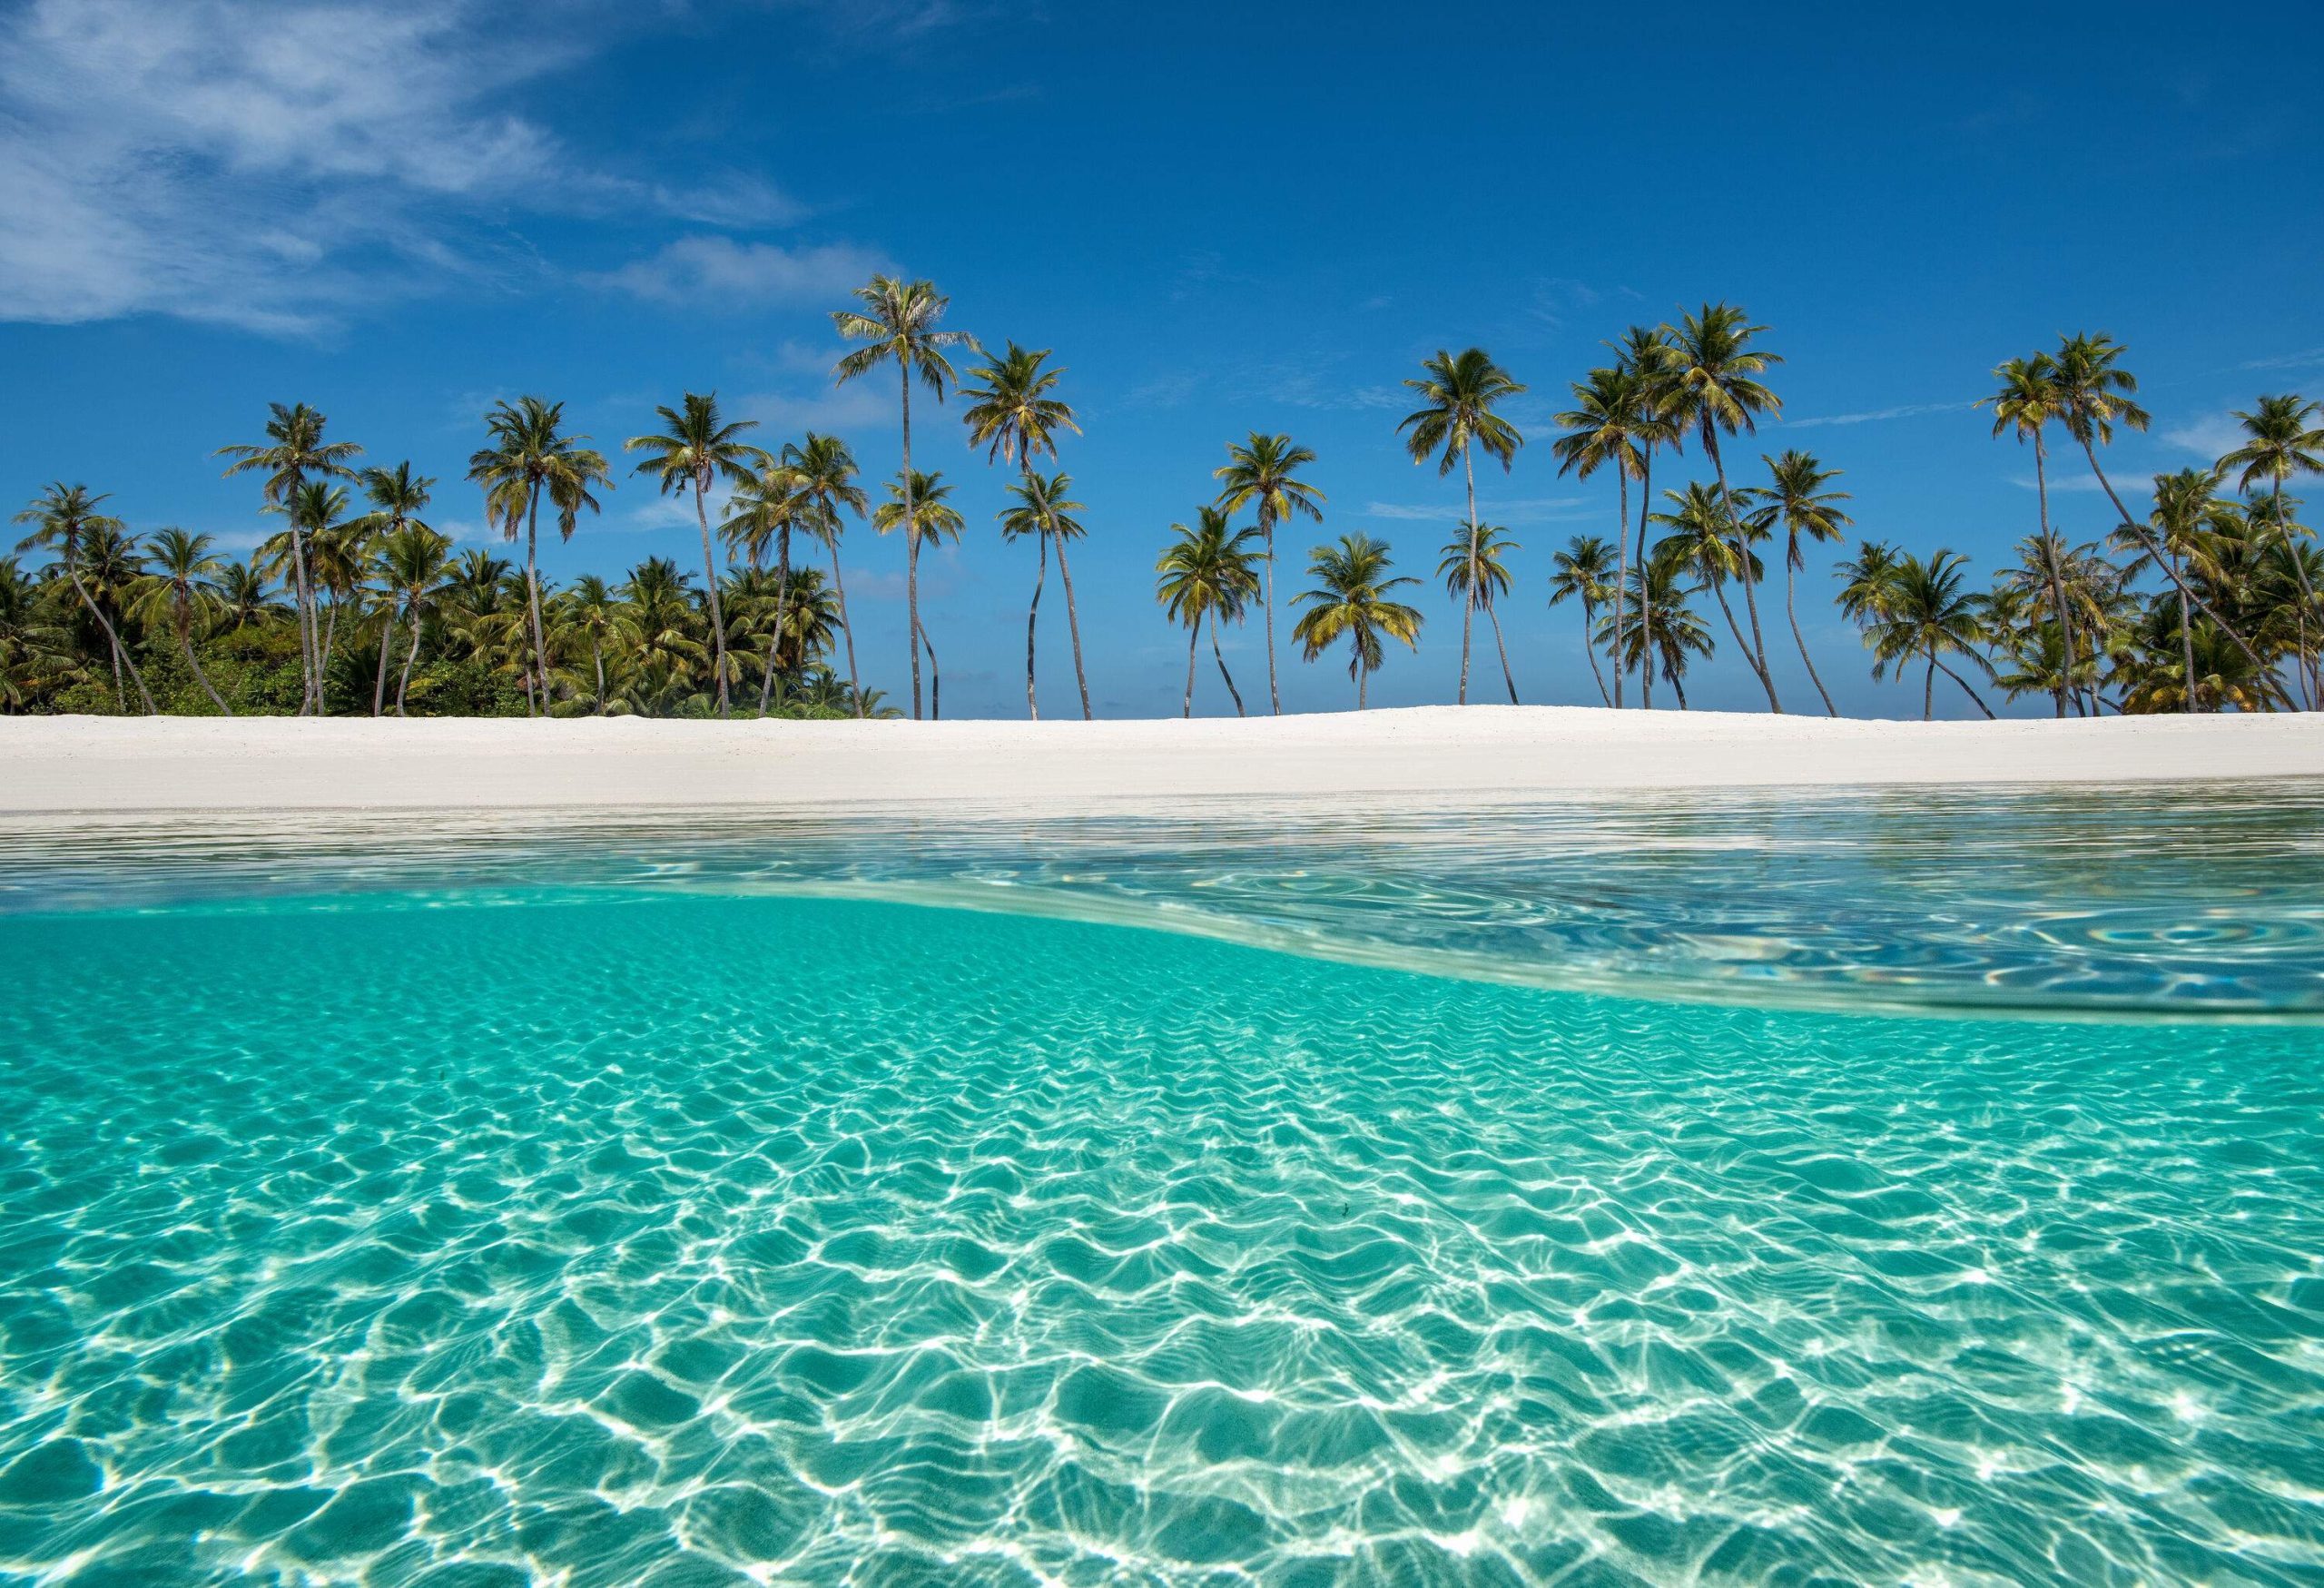 Glistening aquamarine waters embrace a stretch of pristine white sand, adorned with swaying palm trees.